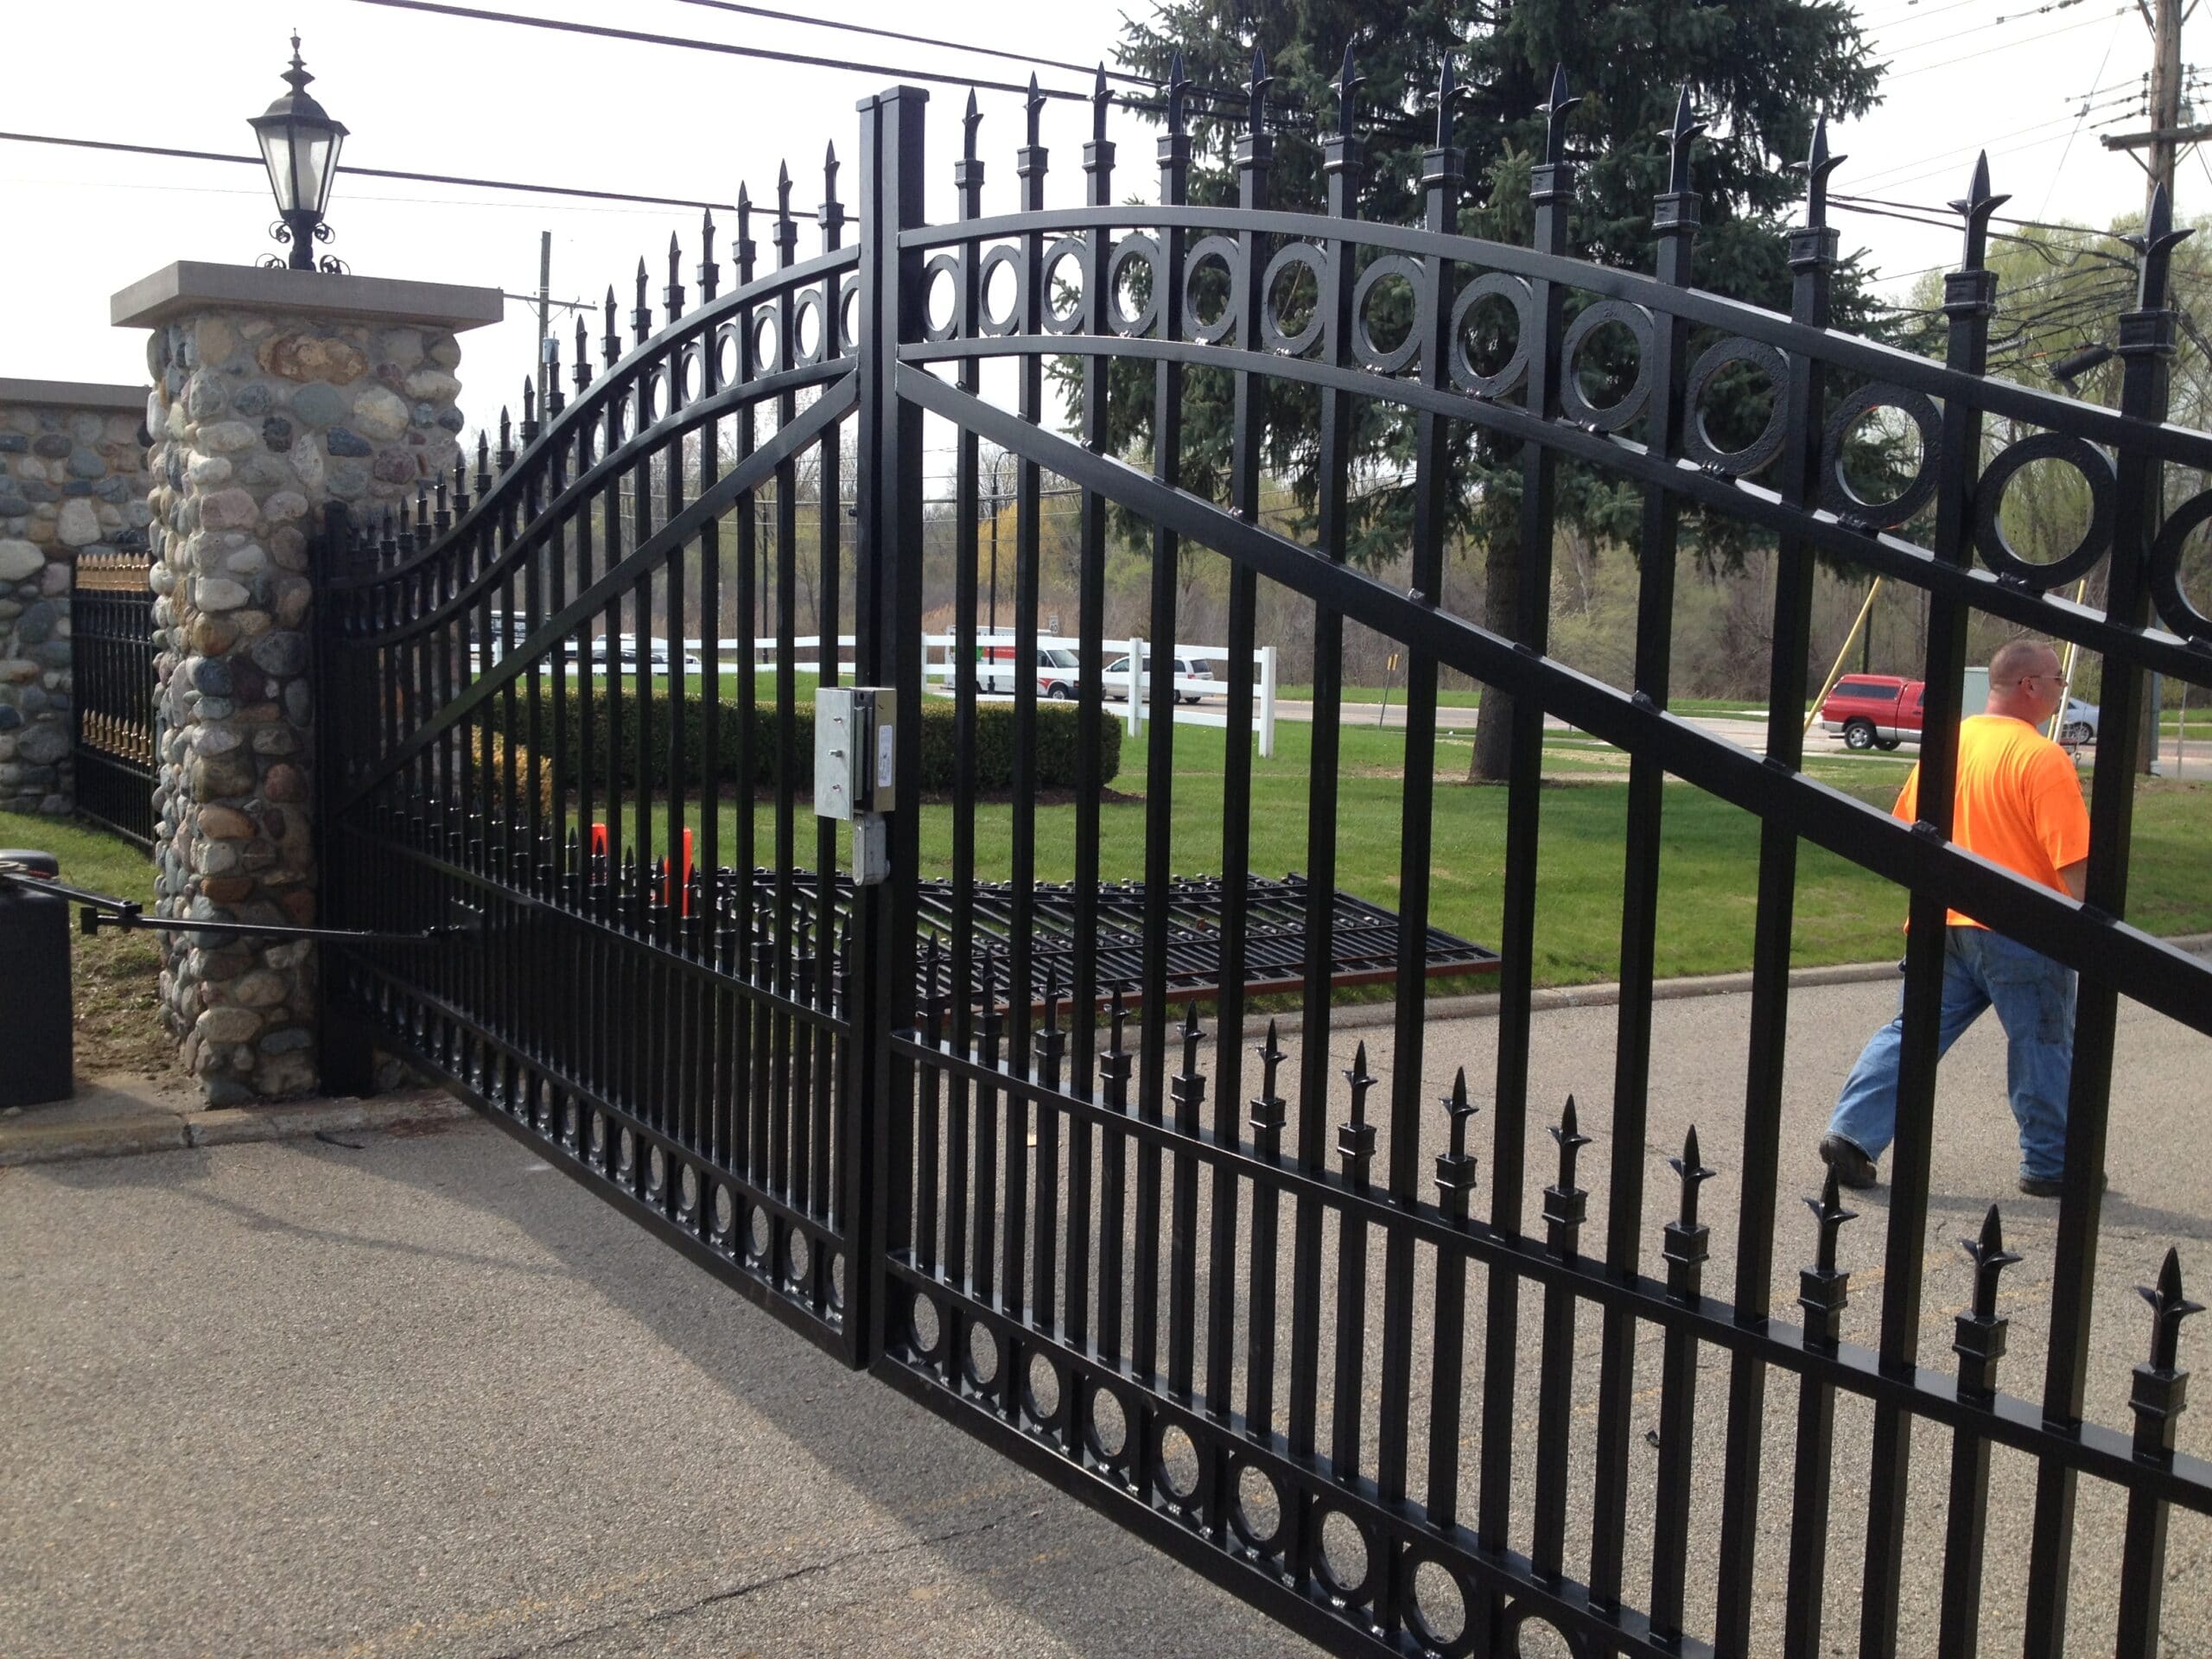 Commercial driveway gate and access control system / electric gate operator at Van Hoosen Jones Cemetery in Rochester, Michigan